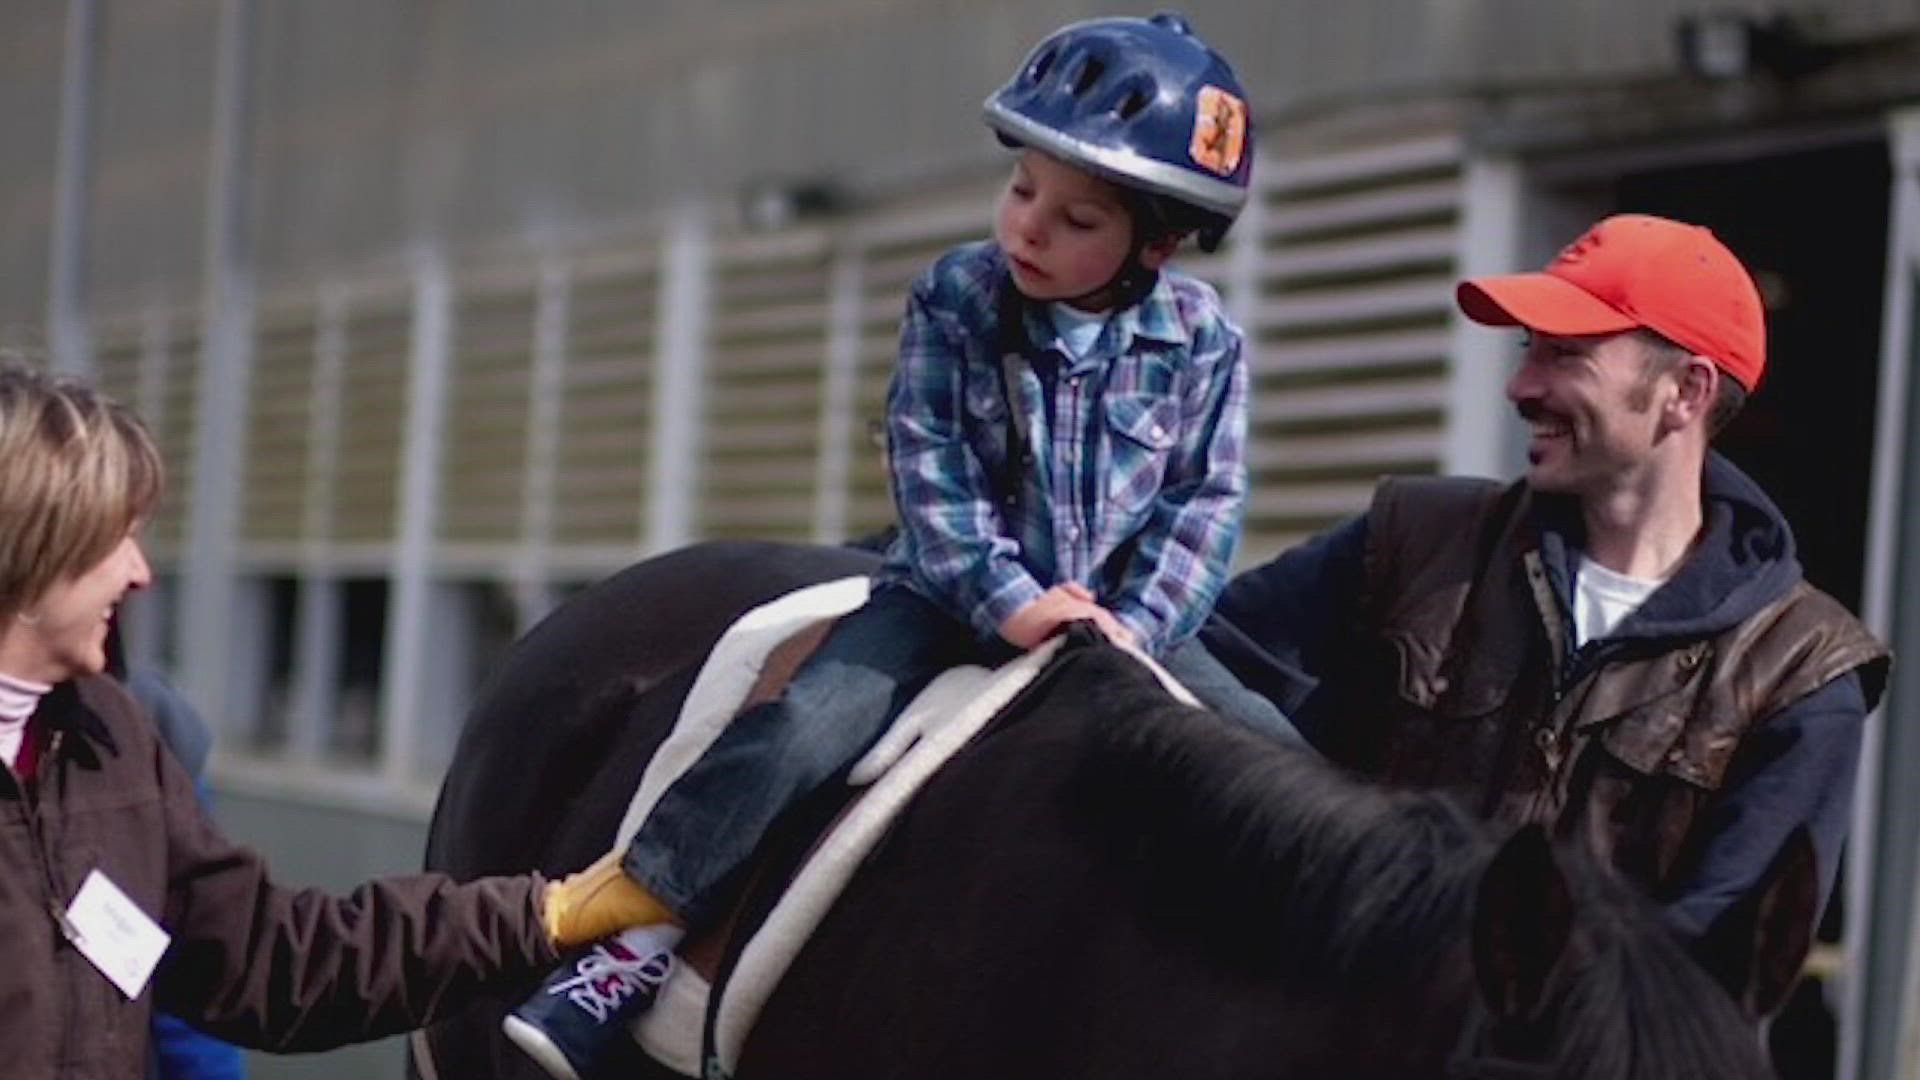 Little Bit Therapeutic Riding Center helps children and adults with disabilities through horseback riding and hippotherapy.